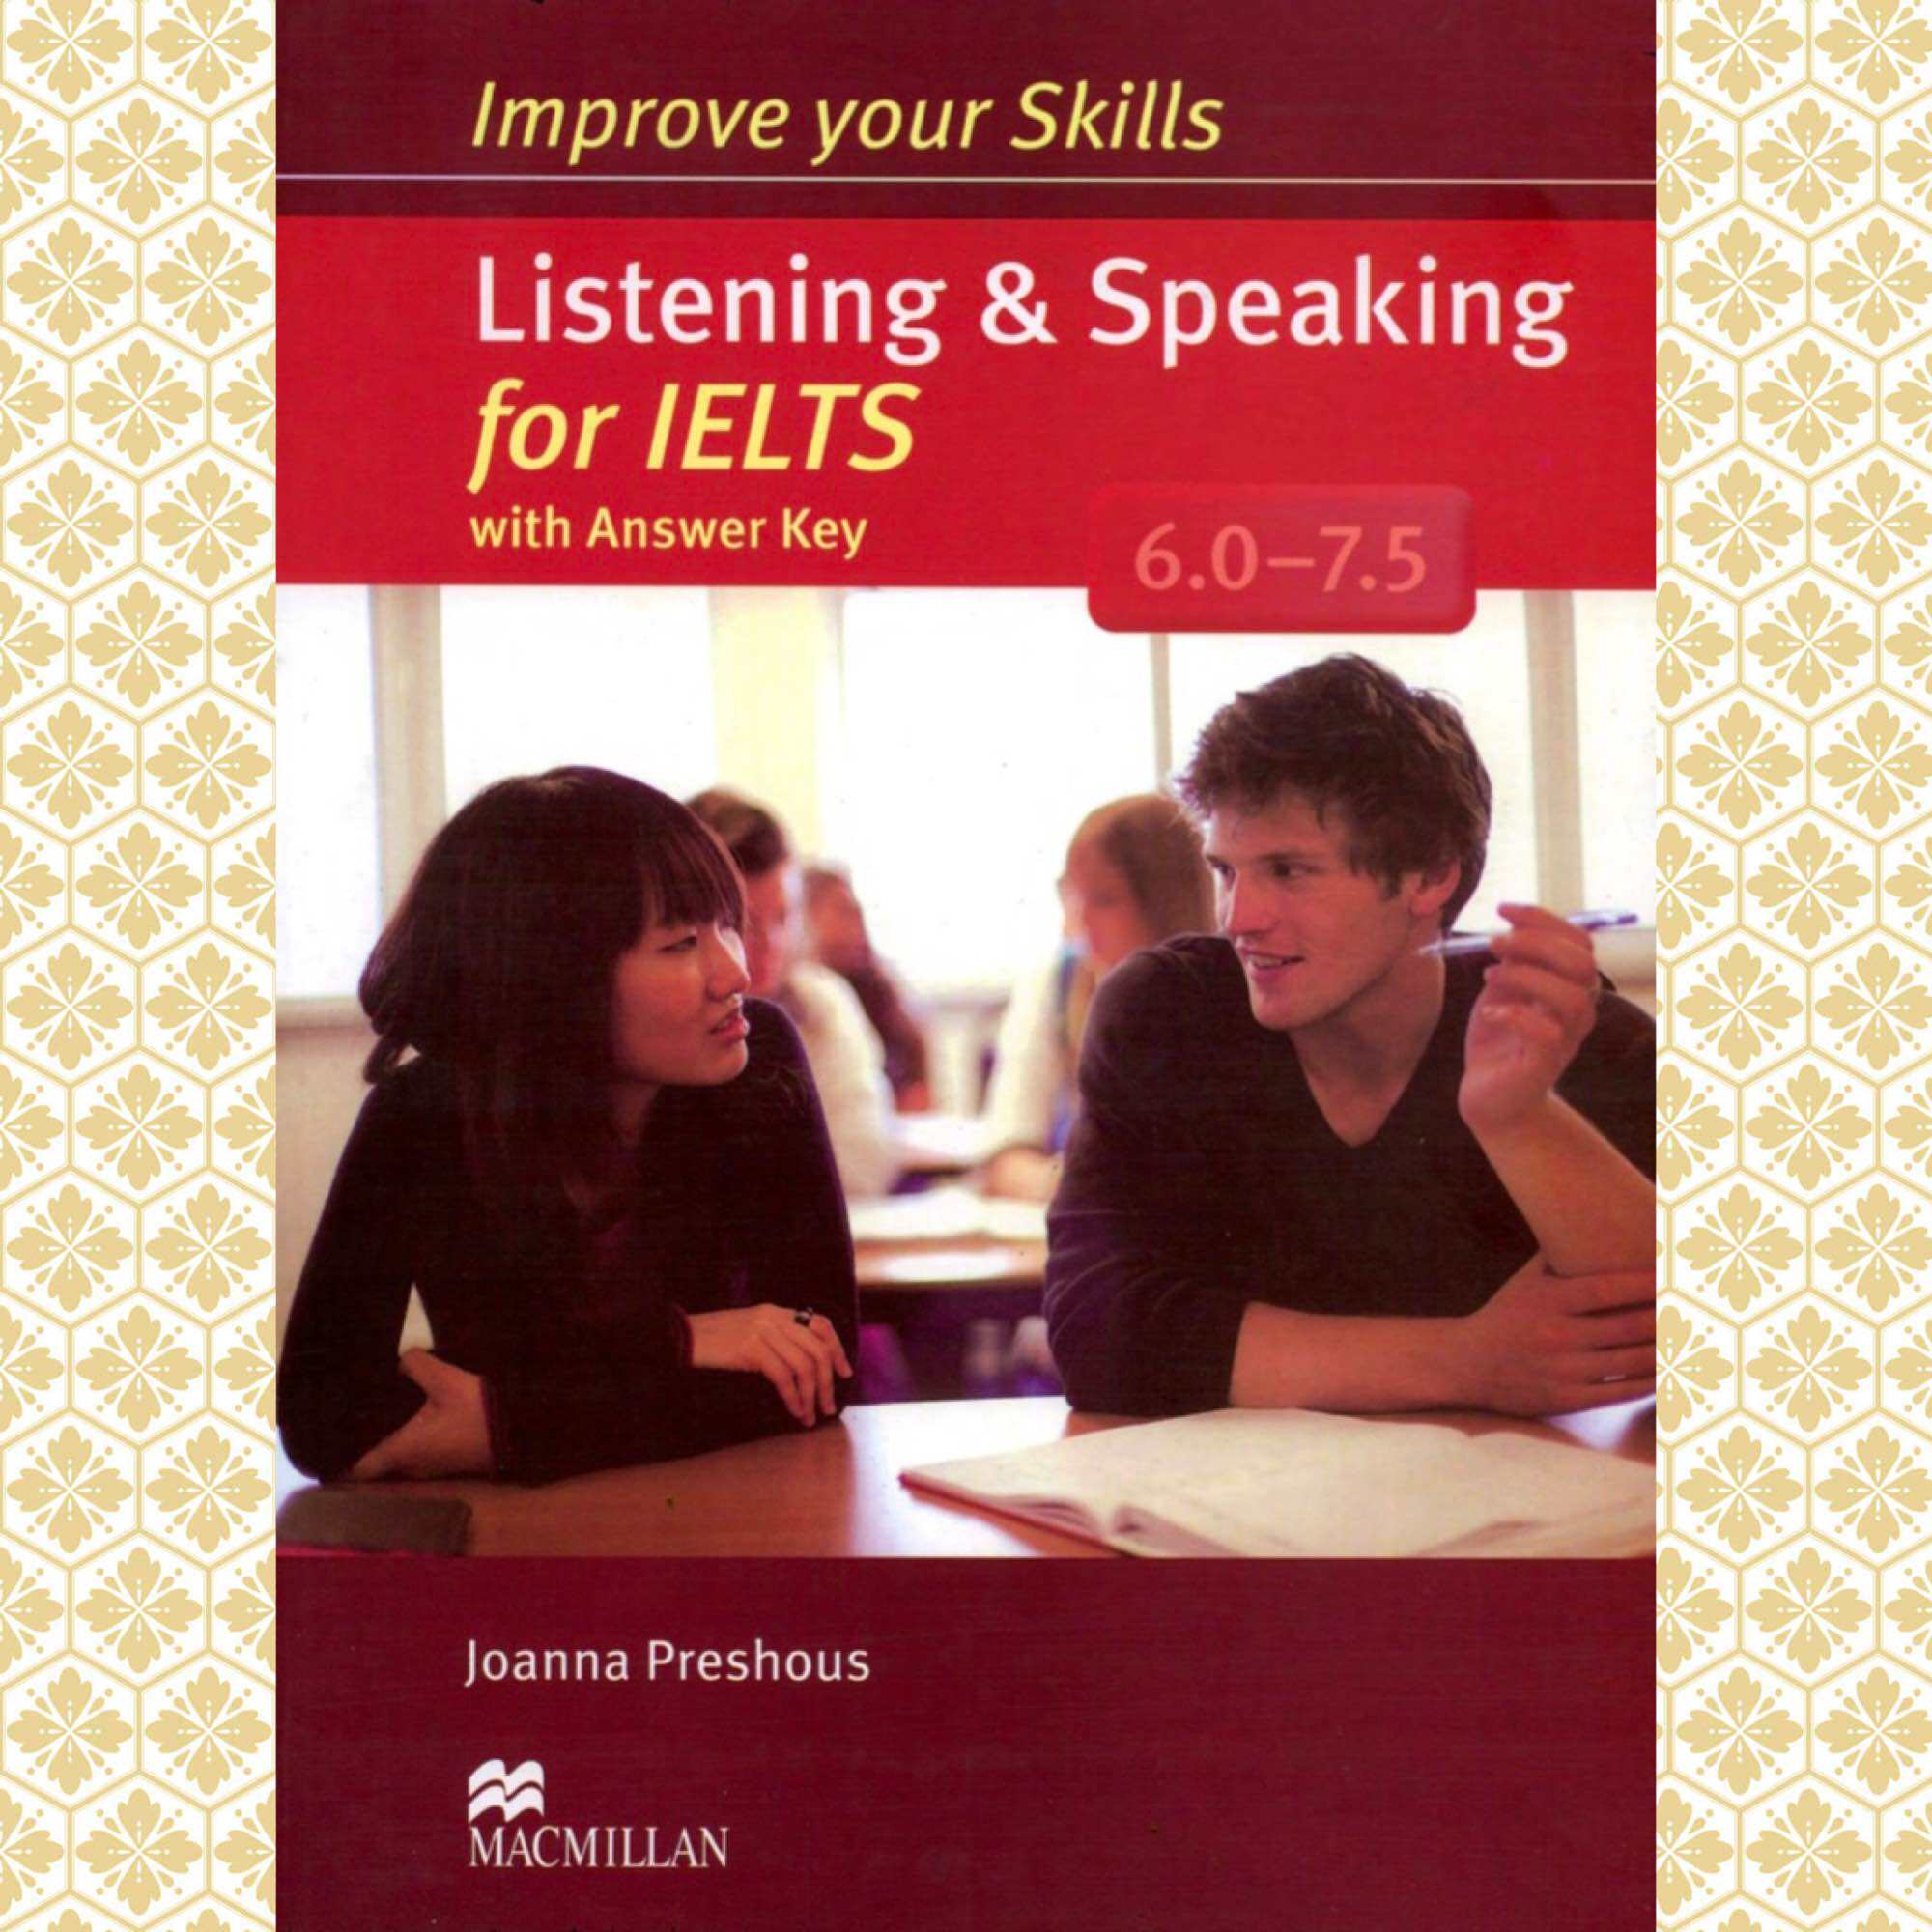 Improve Your Skills Listening & Speaking for IELTS 6.0